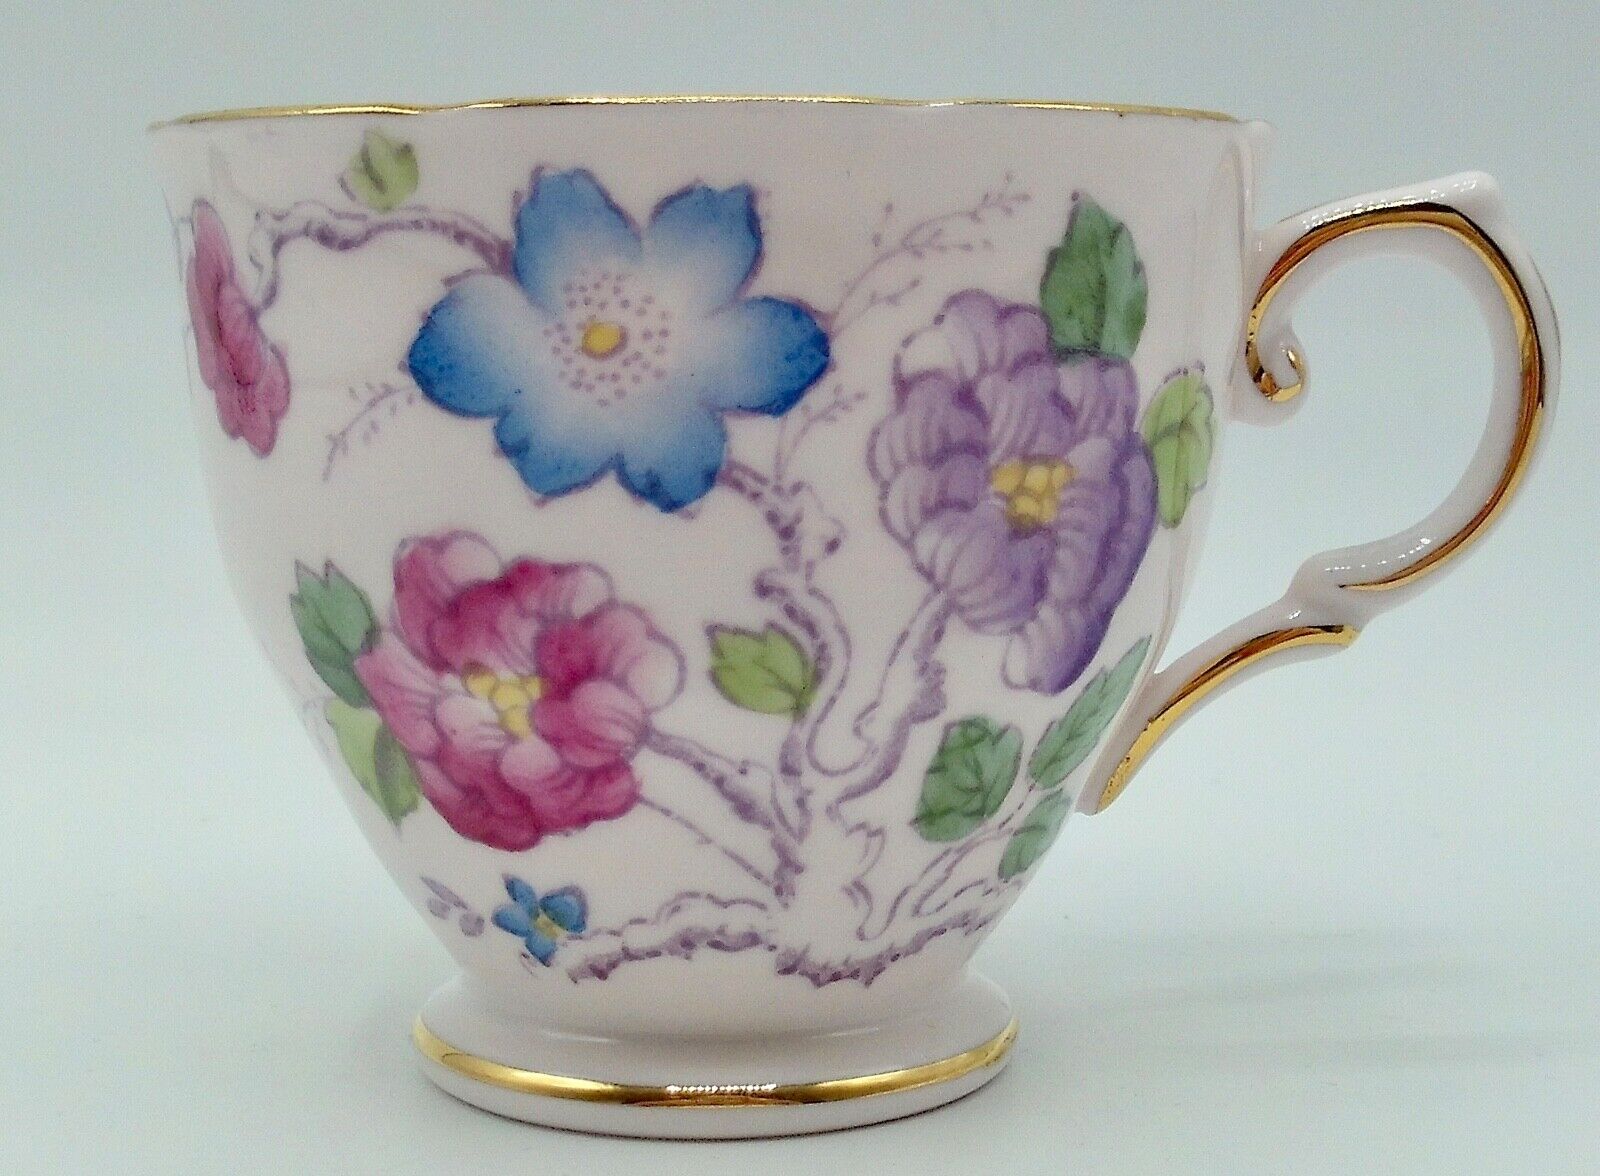 Tuscan Fine English Bone China Tea Cup with Scalloped Rim Floral & Gold Accents